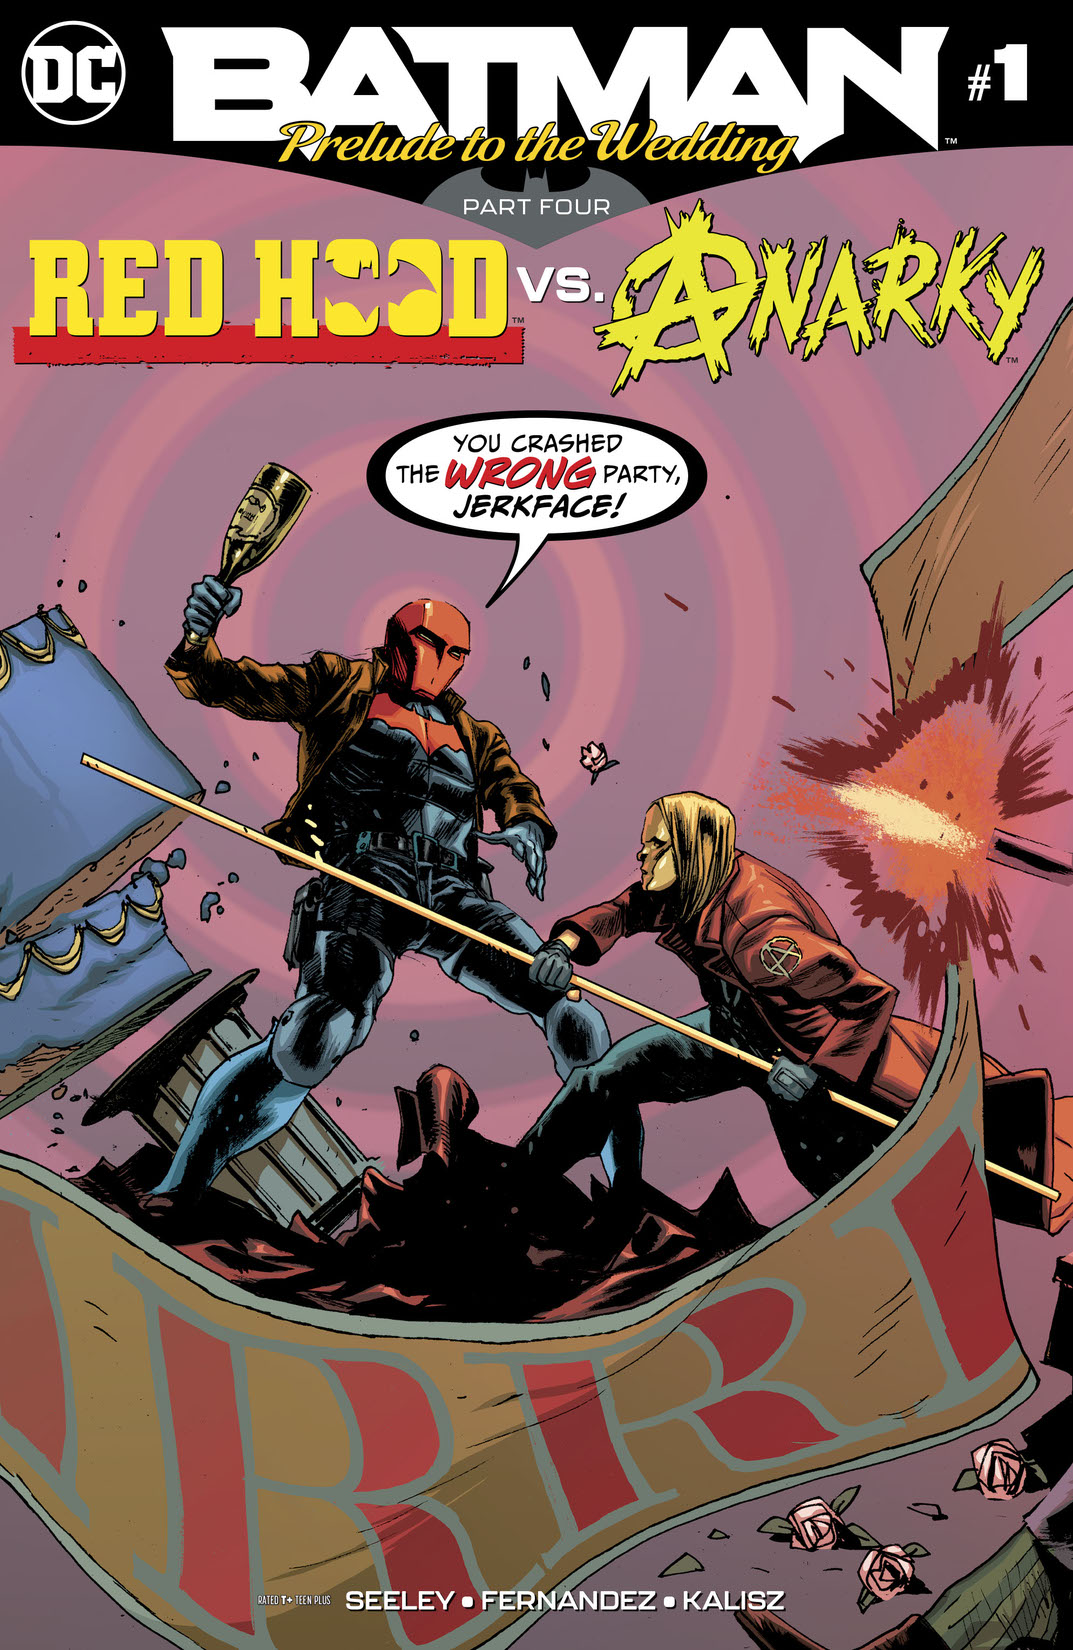 Batman: Prelude to the Wedding: Red Hood vs. Anarky #1 preview images